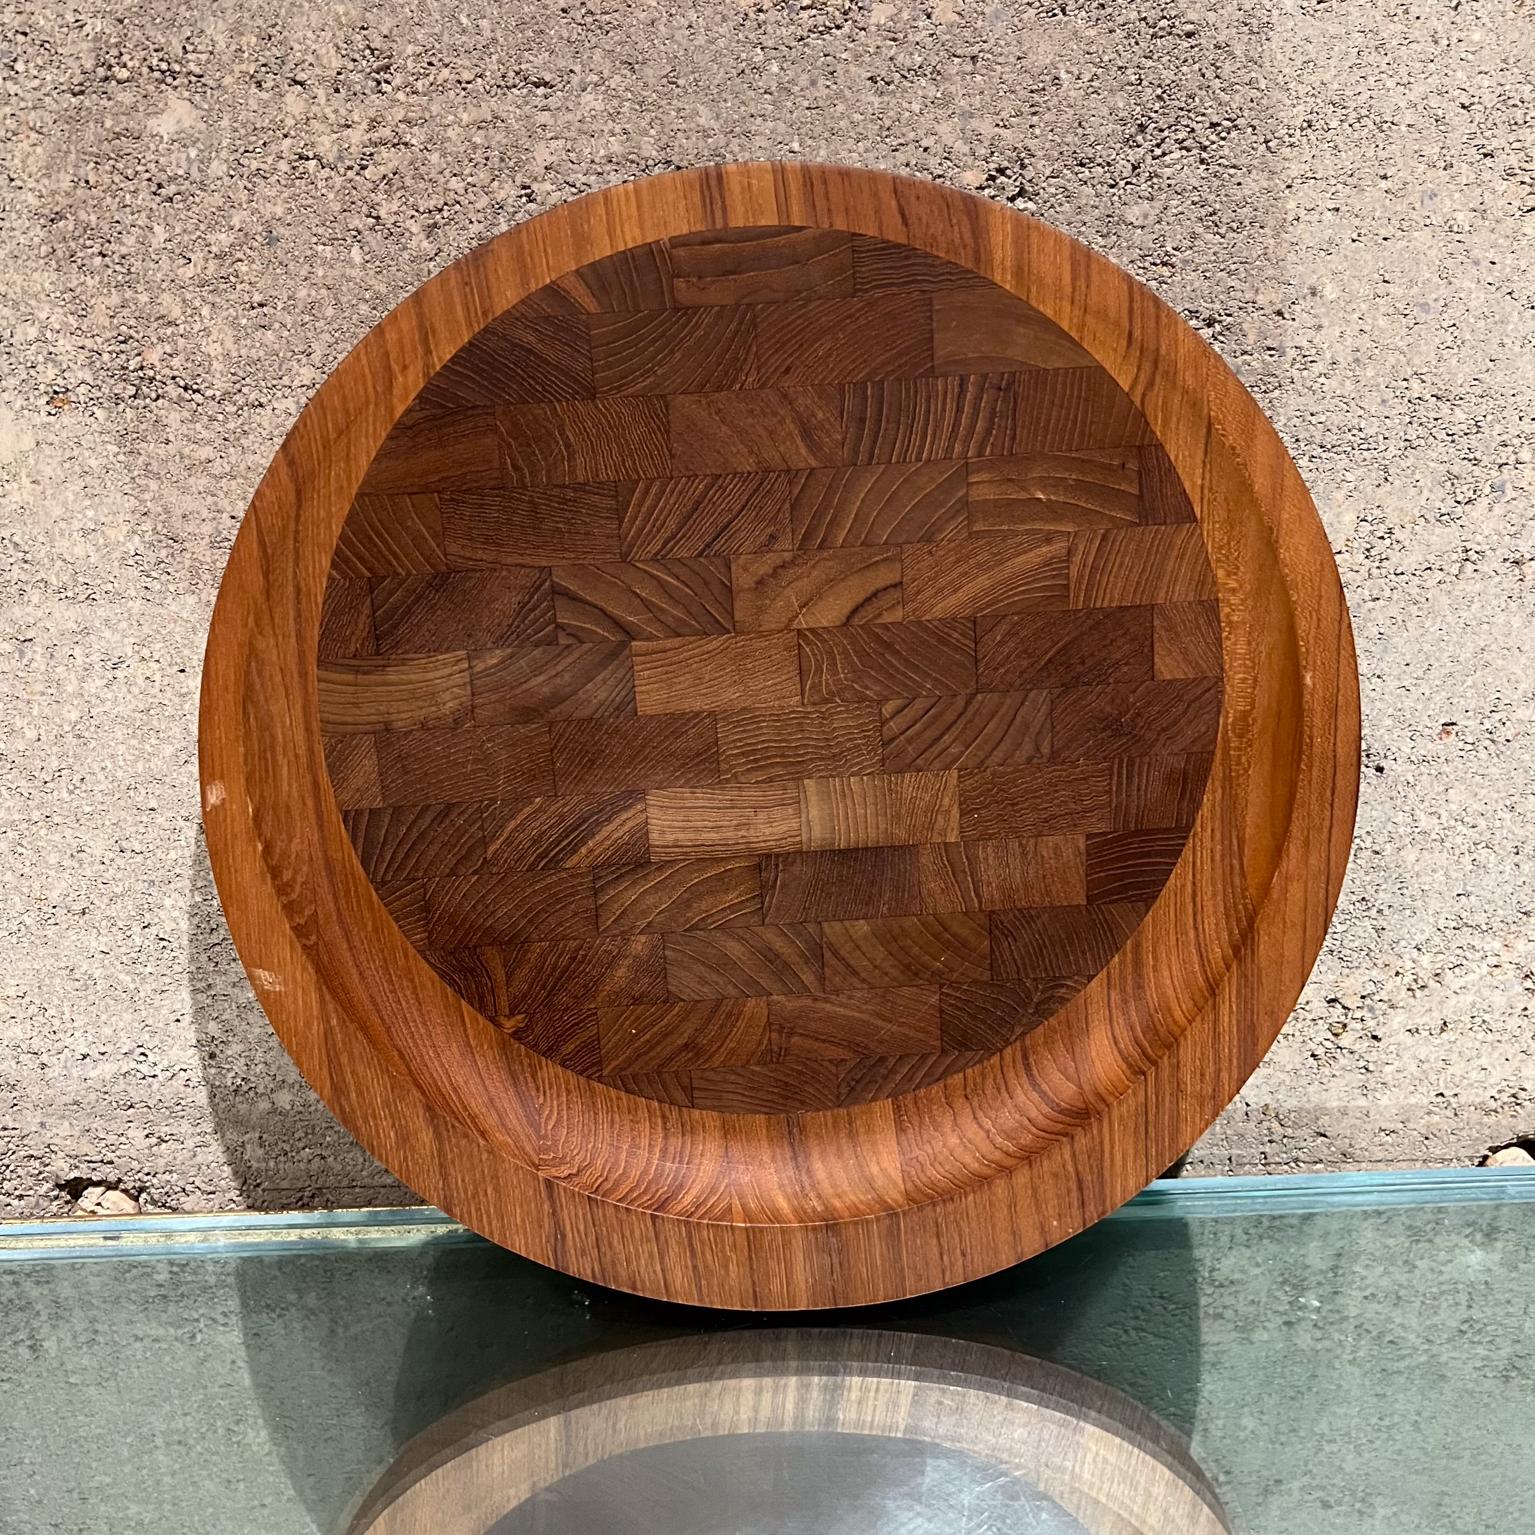 1960s Dansk Staved Teak Cutting Board IHQ Denmark
charcuterie board serving platter meat cutting board.
1.5 h x 13 diameter
designer Jens Quistgaard for Dansk Denmark
Stamped
Preowned good vintage condition
See all images provided.